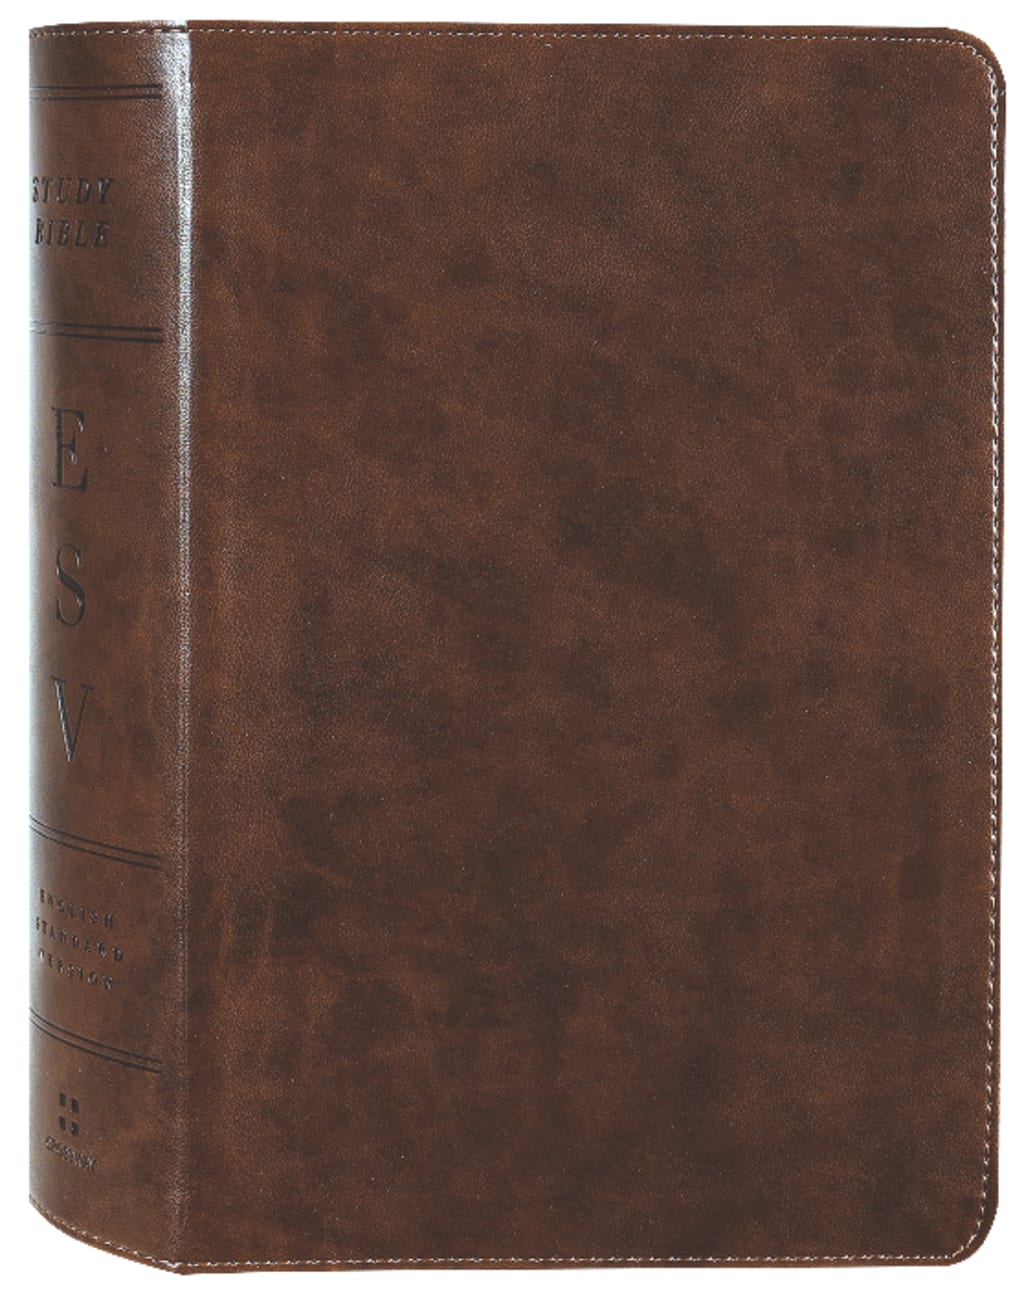 ESV Study Bible Personal Size Brown Trutone (Black Letter Edition) Imitation Leather